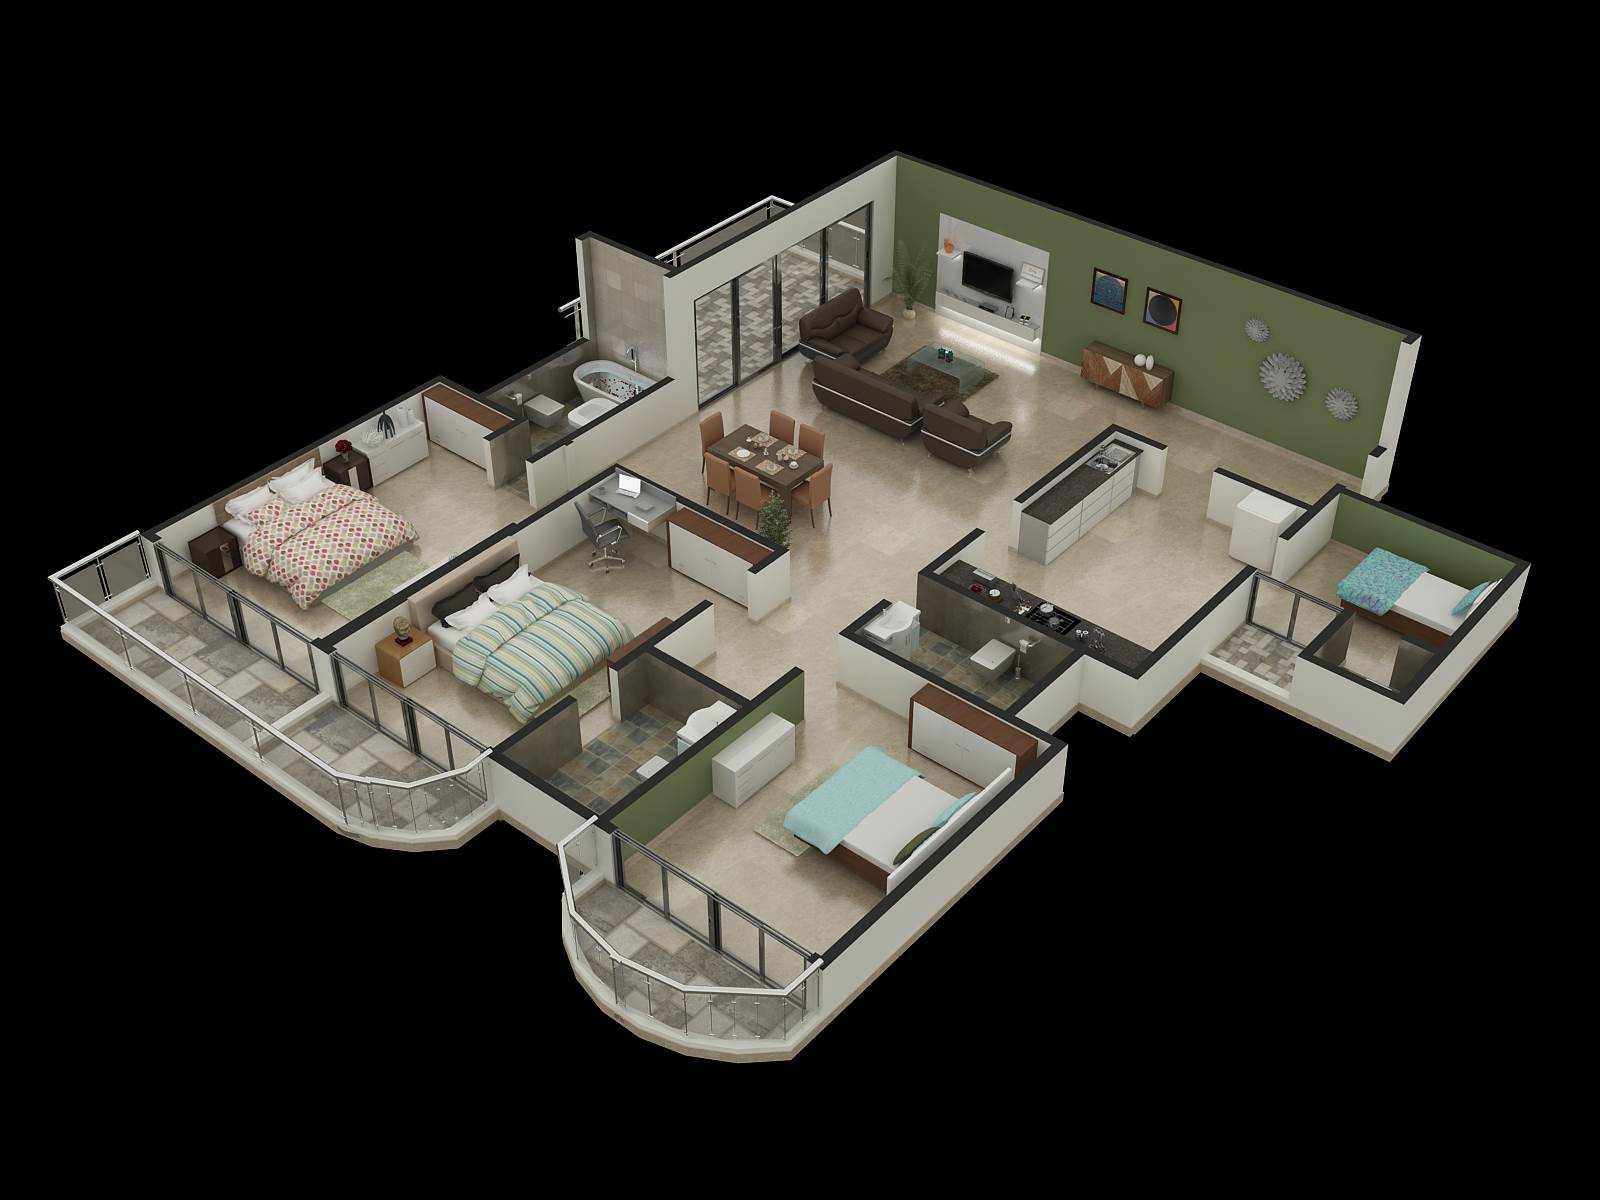 3D Floor Plan http://www.rayvatengineering.com/3d-floor-plan/ - 3D Floor Plan  architectural floor plans are suitable for advertising and marketing campaigns. by Rayvatengineering